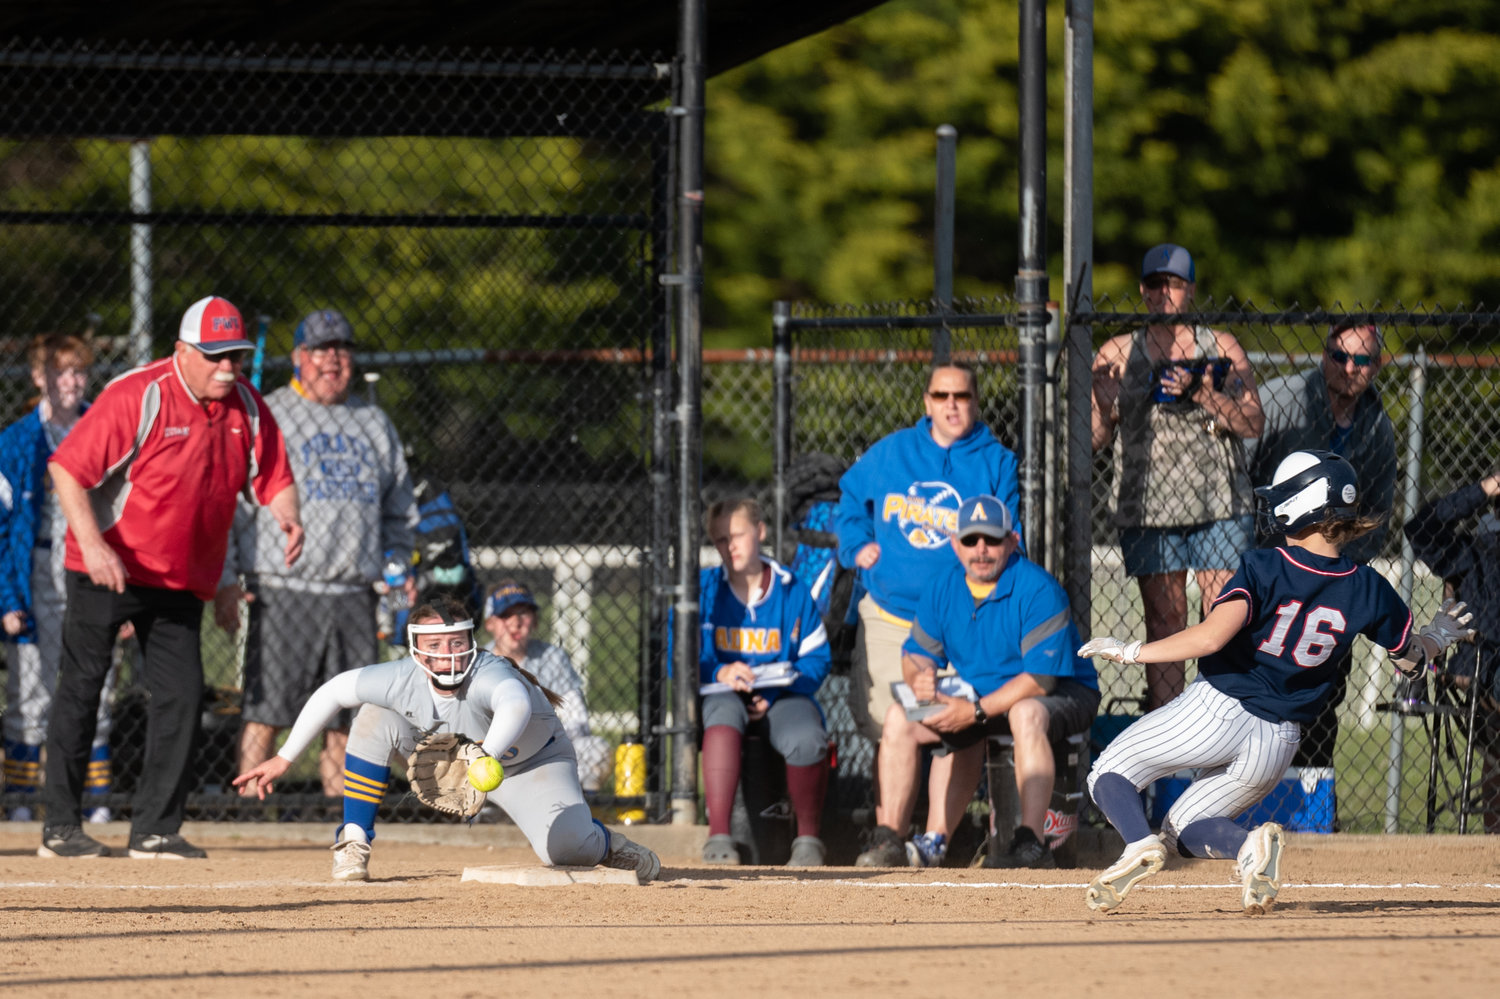 Adna third baseman Ashlee VonMoos can't hold on to a ball while PWV's Lauren Matlock slides into third in the 2B District 4 softball championship game at Fort Borst Park in Centralia May 21.